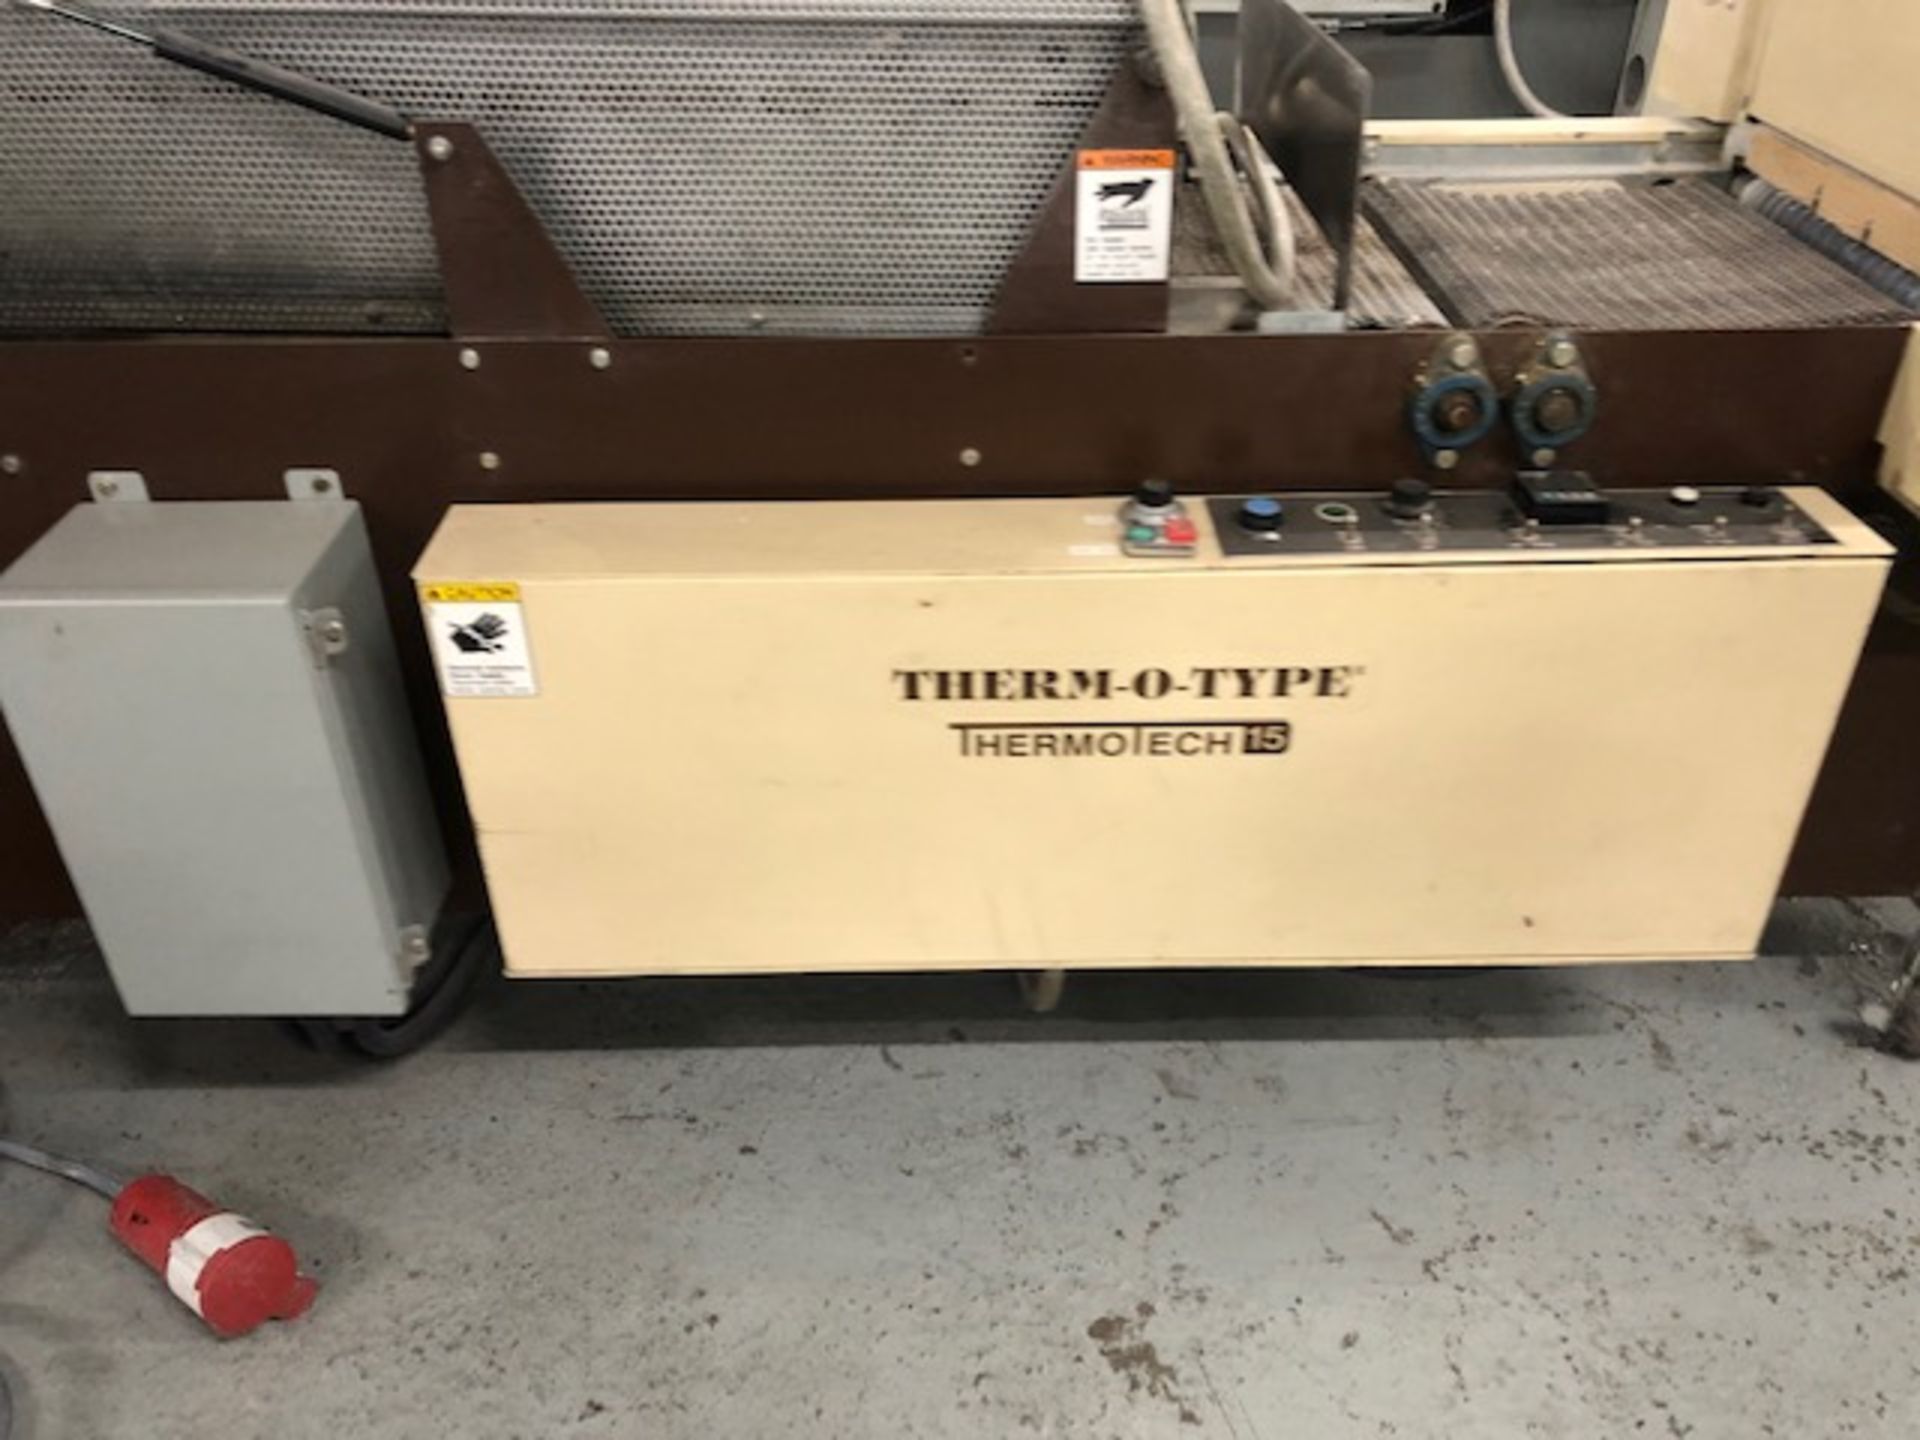 Therm-o-Type TT12 Flittering Line, 208volts, seria - Image 10 of 12